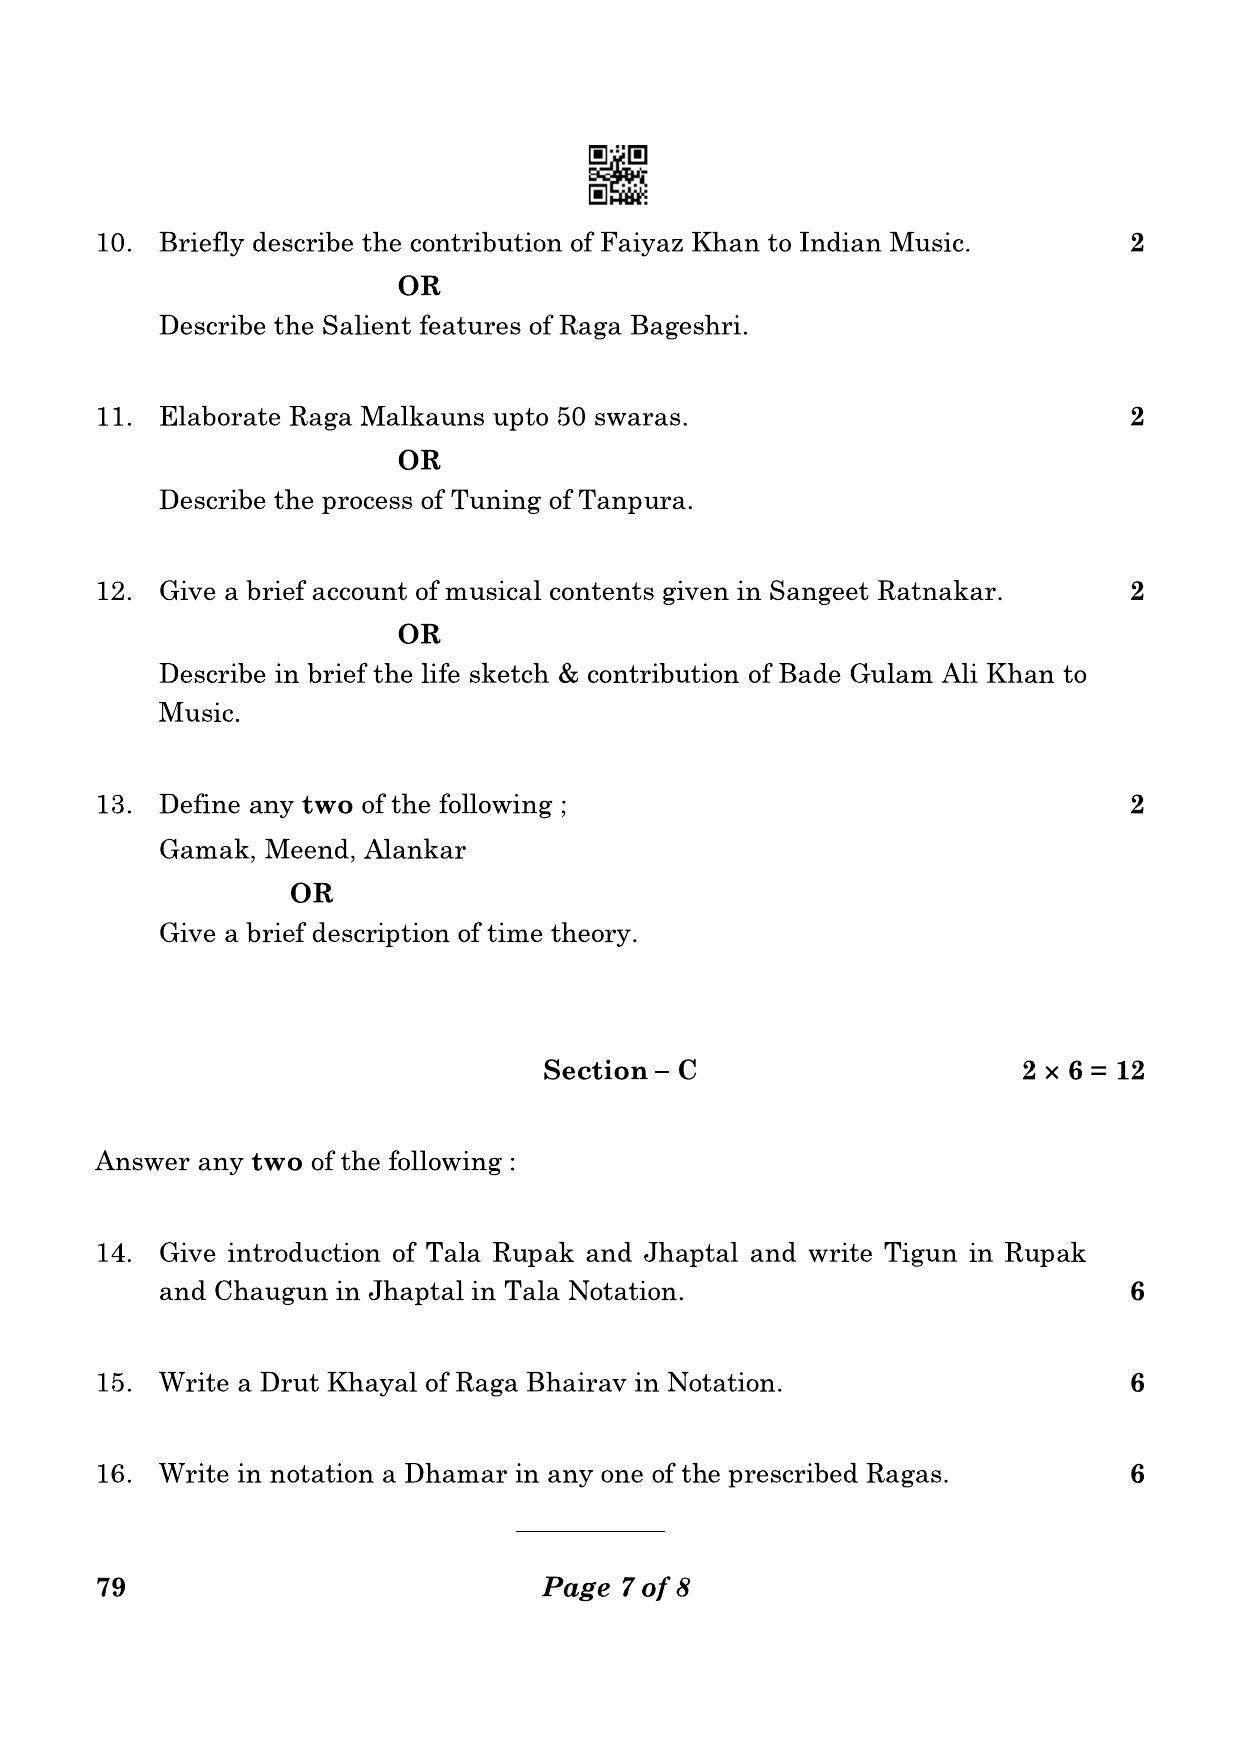 CBSE Class 12 79_Music Hindustani Vocal 2023 Question Paper - Page 7